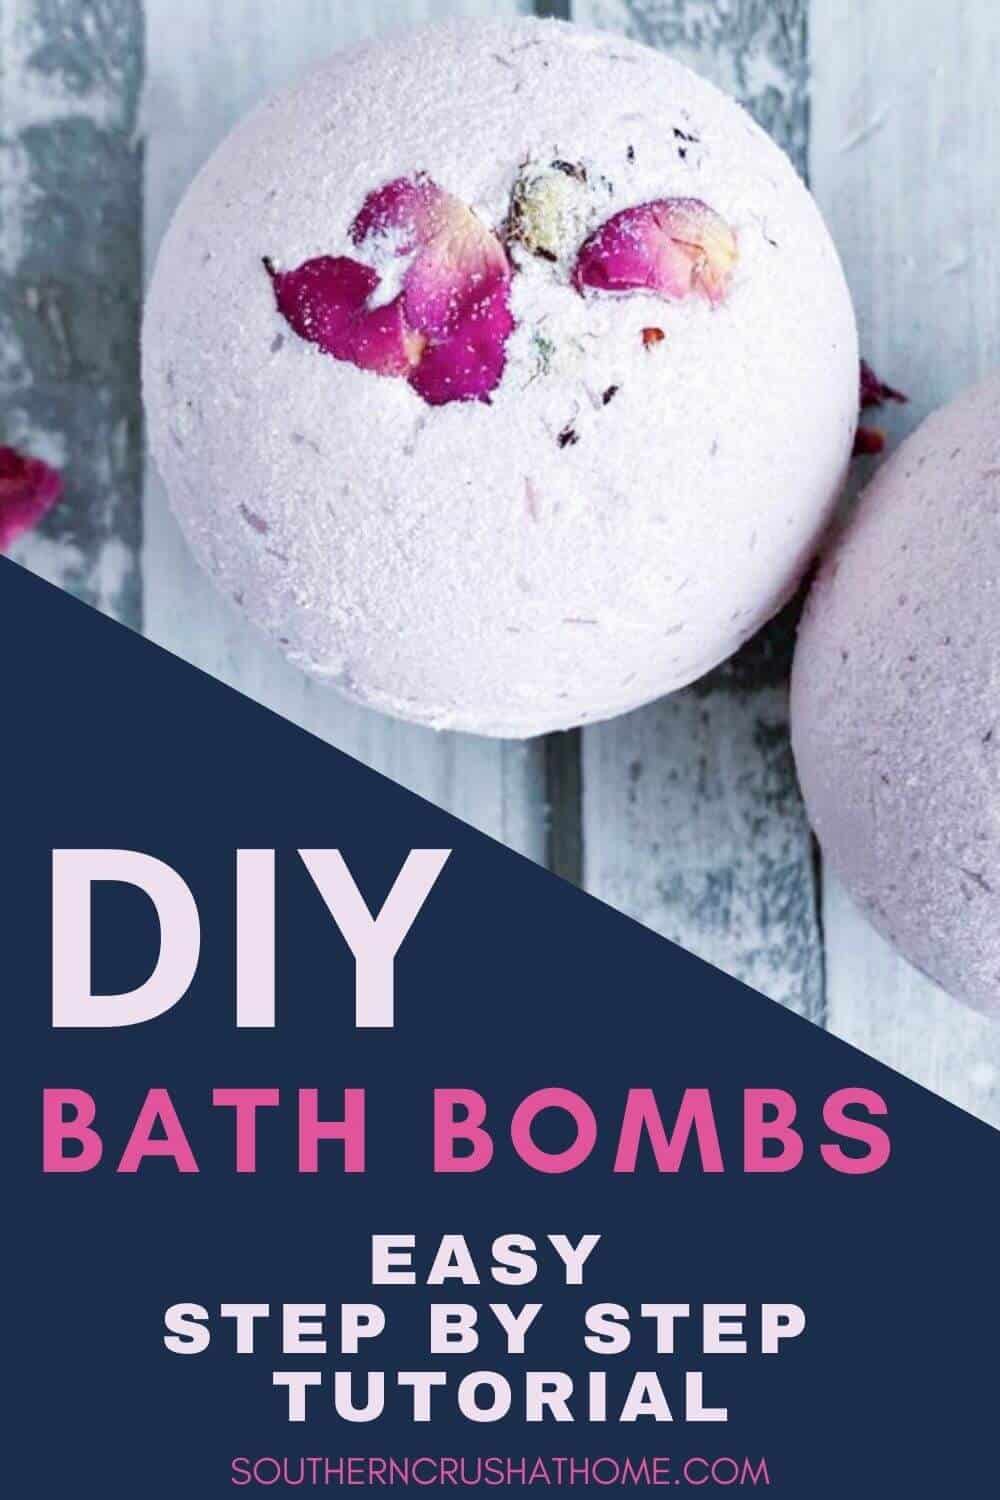 Free 30 Bath Bomb Recipes E Book Emailed to You 15 Pack Clear Plastic Regular Size 2 1/8 Diameter Craft Lion Bath Bomb Ball Mold Excellent for Homemade DIY Bath Ball Fizzy 